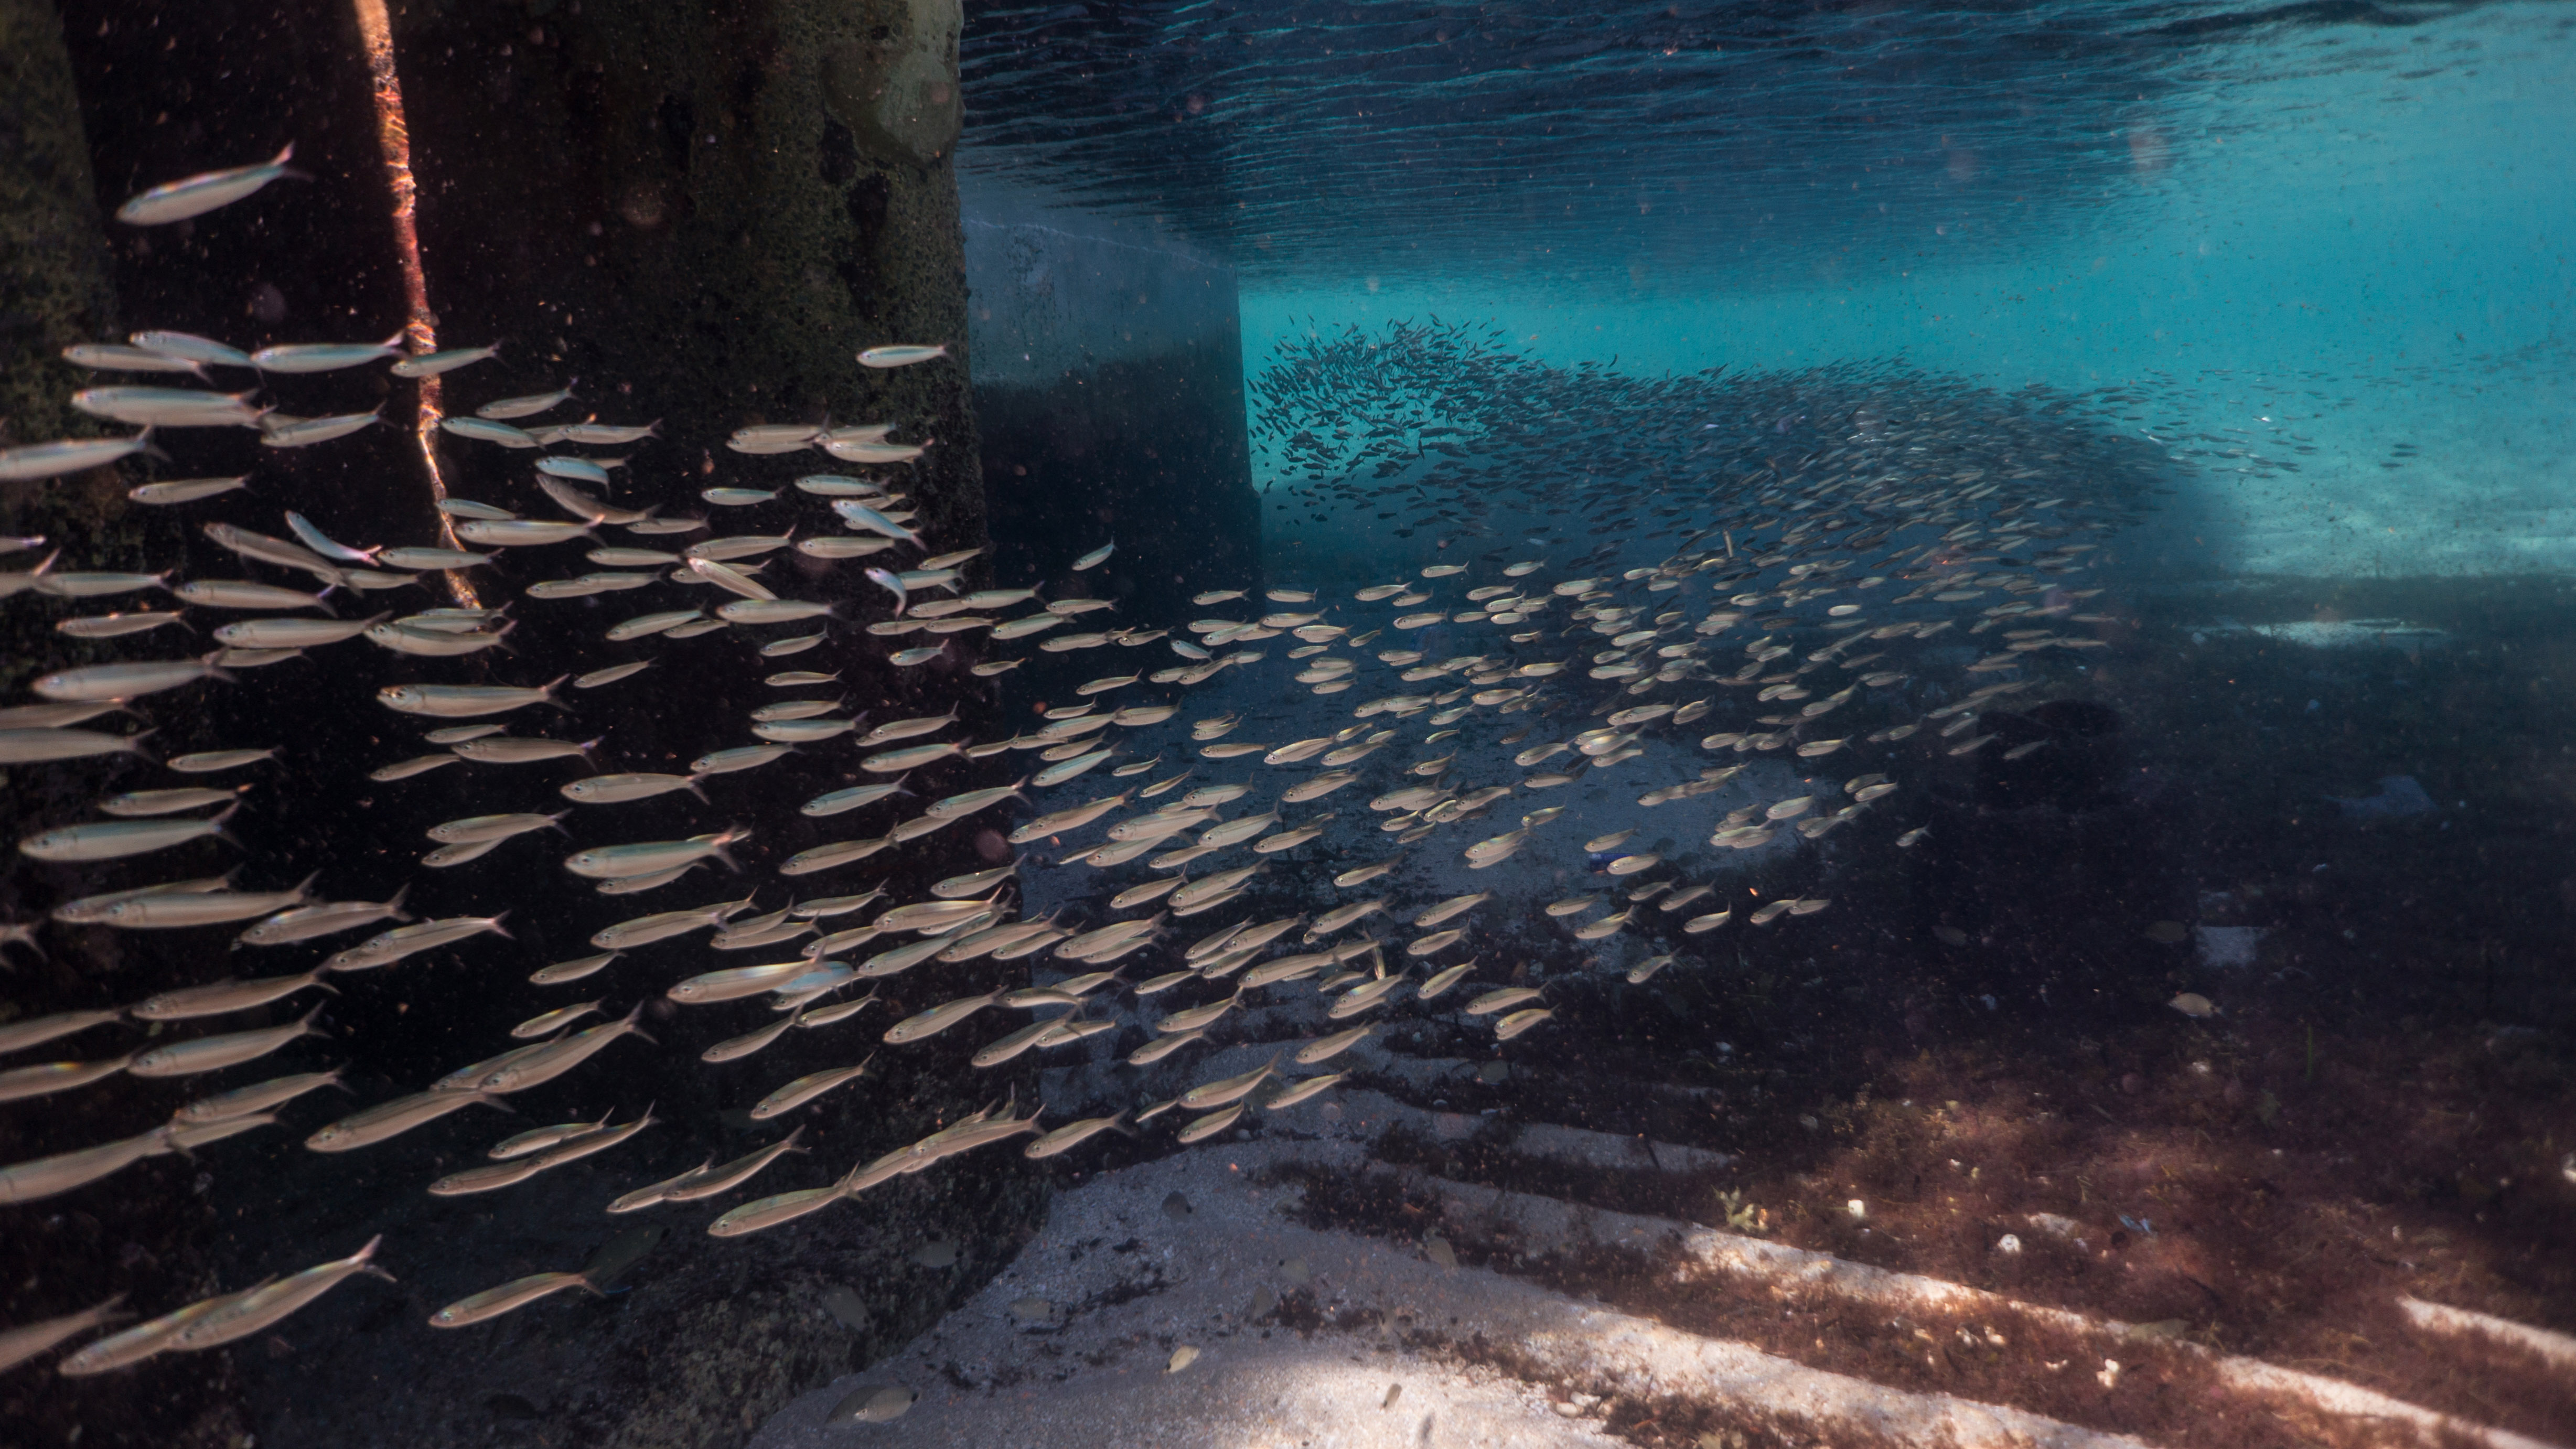 A school of forage fish, including cigar minnows, darts under the shadow of a dock, possibly to avoid detection by predators. In addition to being essential food for marine life, forage fish also are in high demand as feed for fish farms and livestock and for use in consumer products such as cosmetics, pet food, and fertilizers.